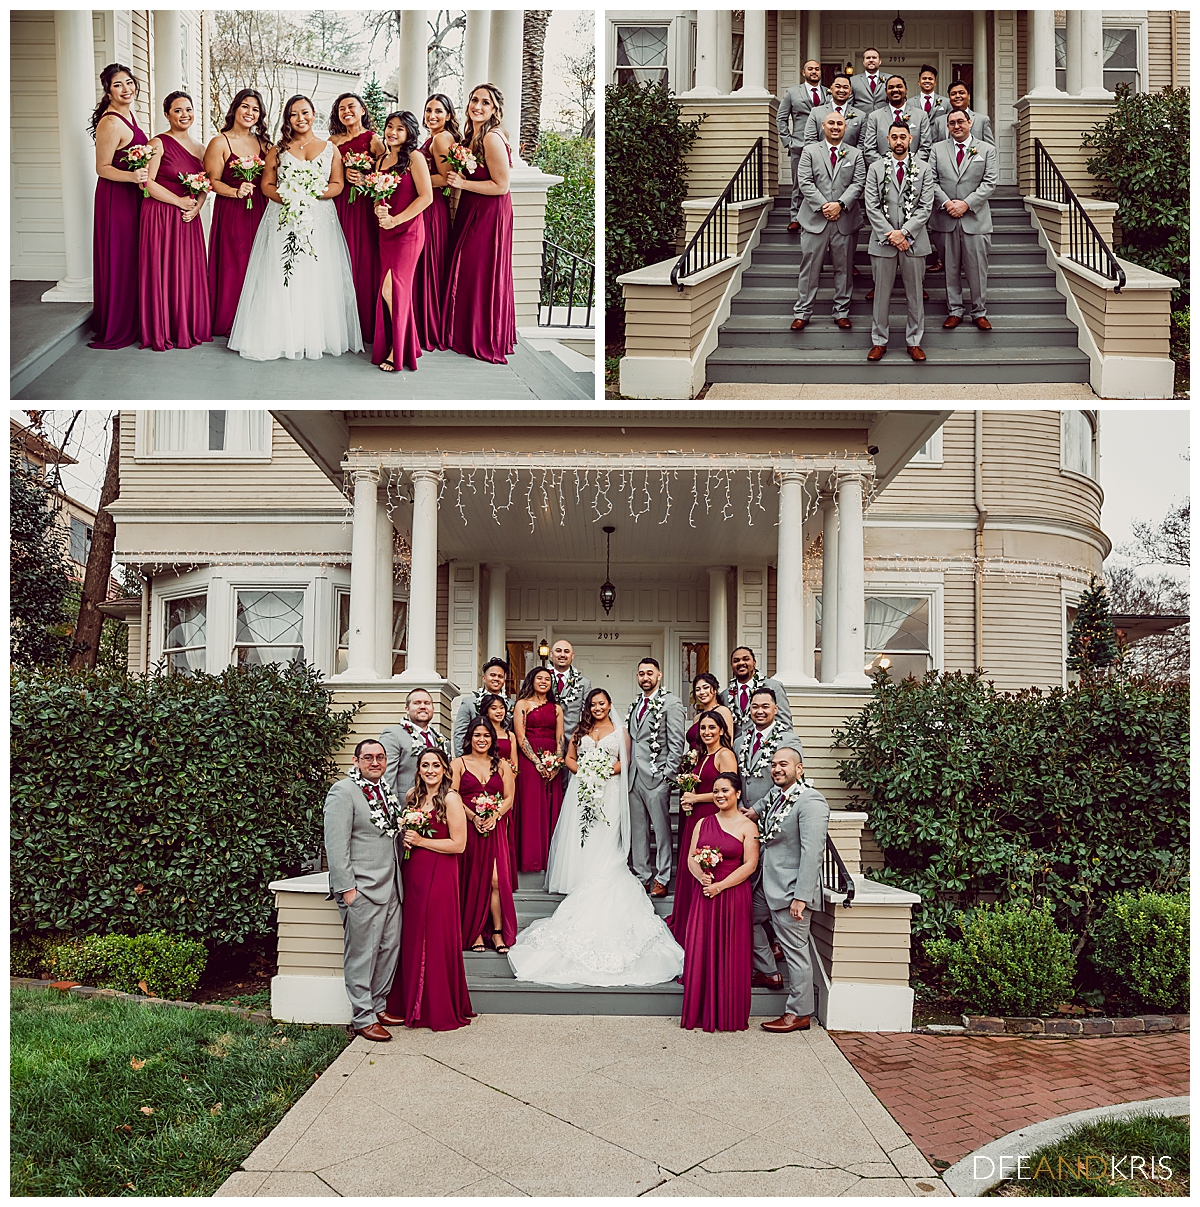 Three images: Top left image of bride and bridesmaids in burgundy dresses lined up with bouquets. Top right image of groom with groomsmen grouped on stairs.  Bottom image of entire wedding party grouped on stairs.